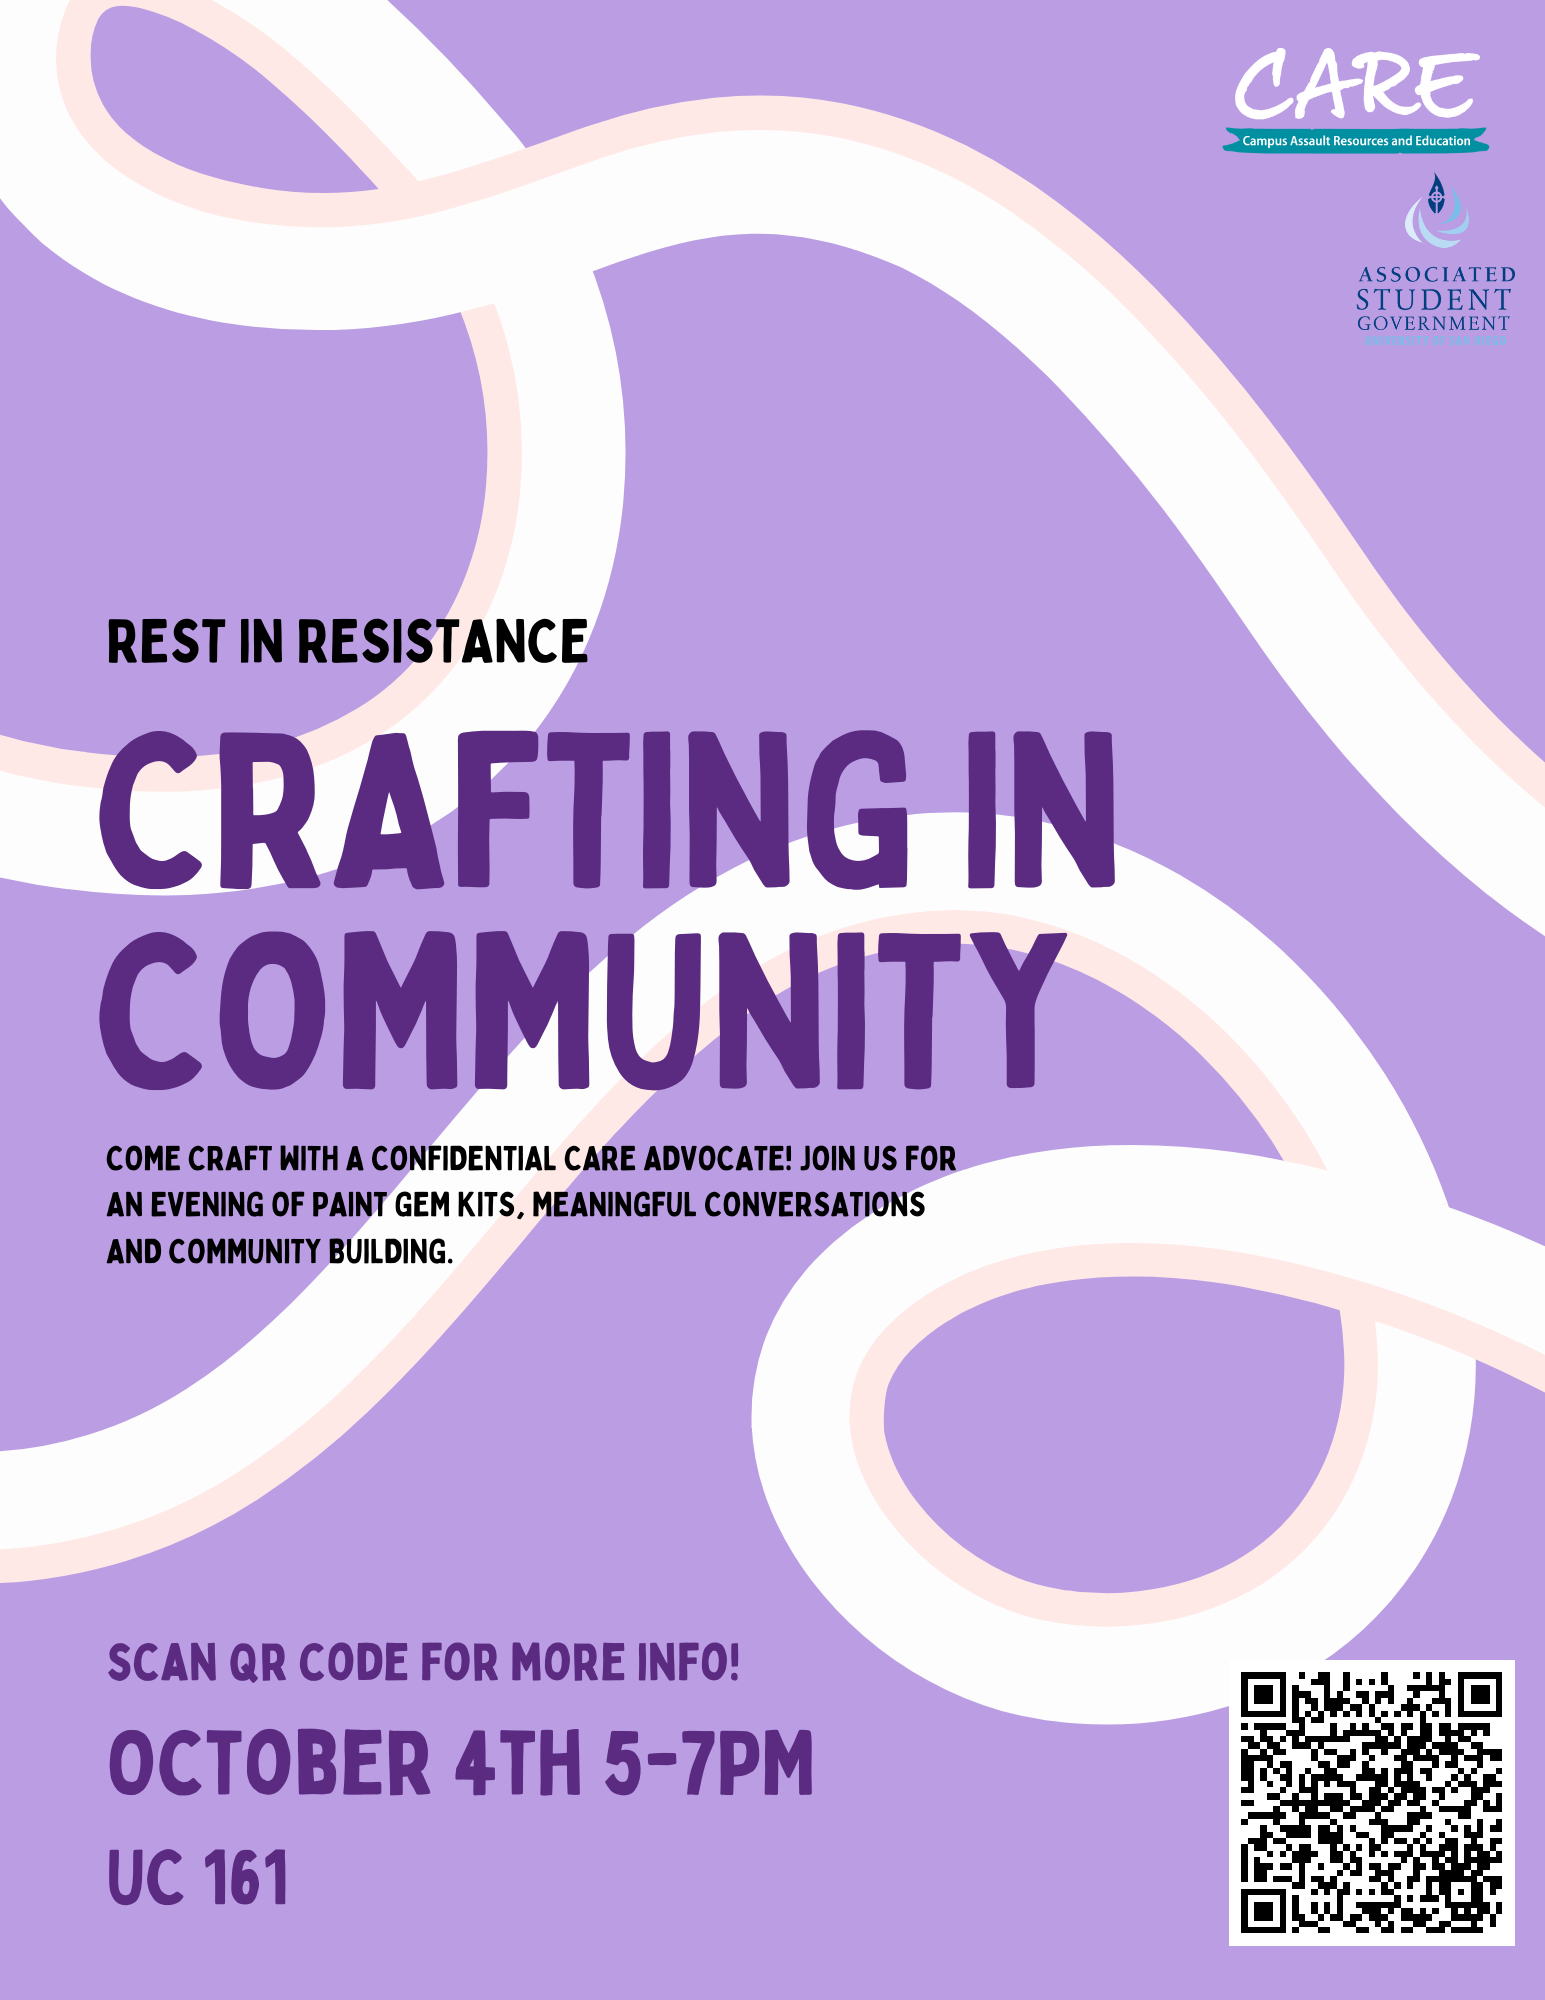 On a purple background, the following text reads: "Rest in Resistance. Crafting in Community ; Come craft with a confidential care advocate! join us for an evening of paint gem kits, meaningful c